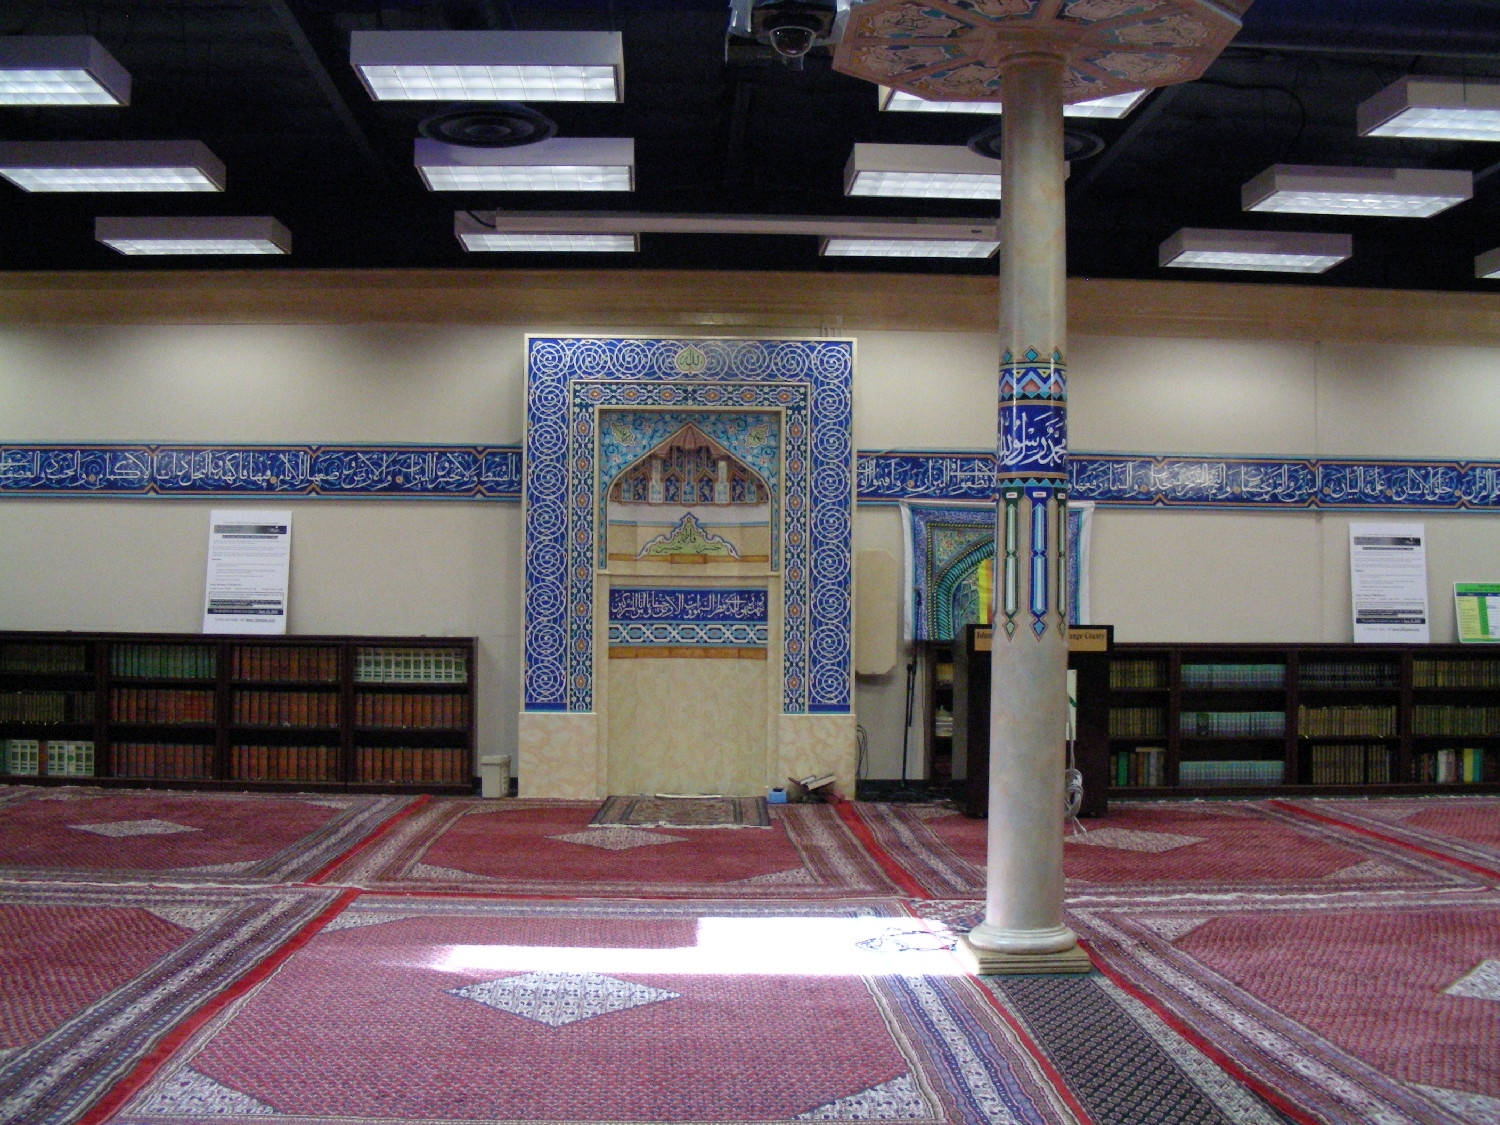 Prayer hall, view to mihrab